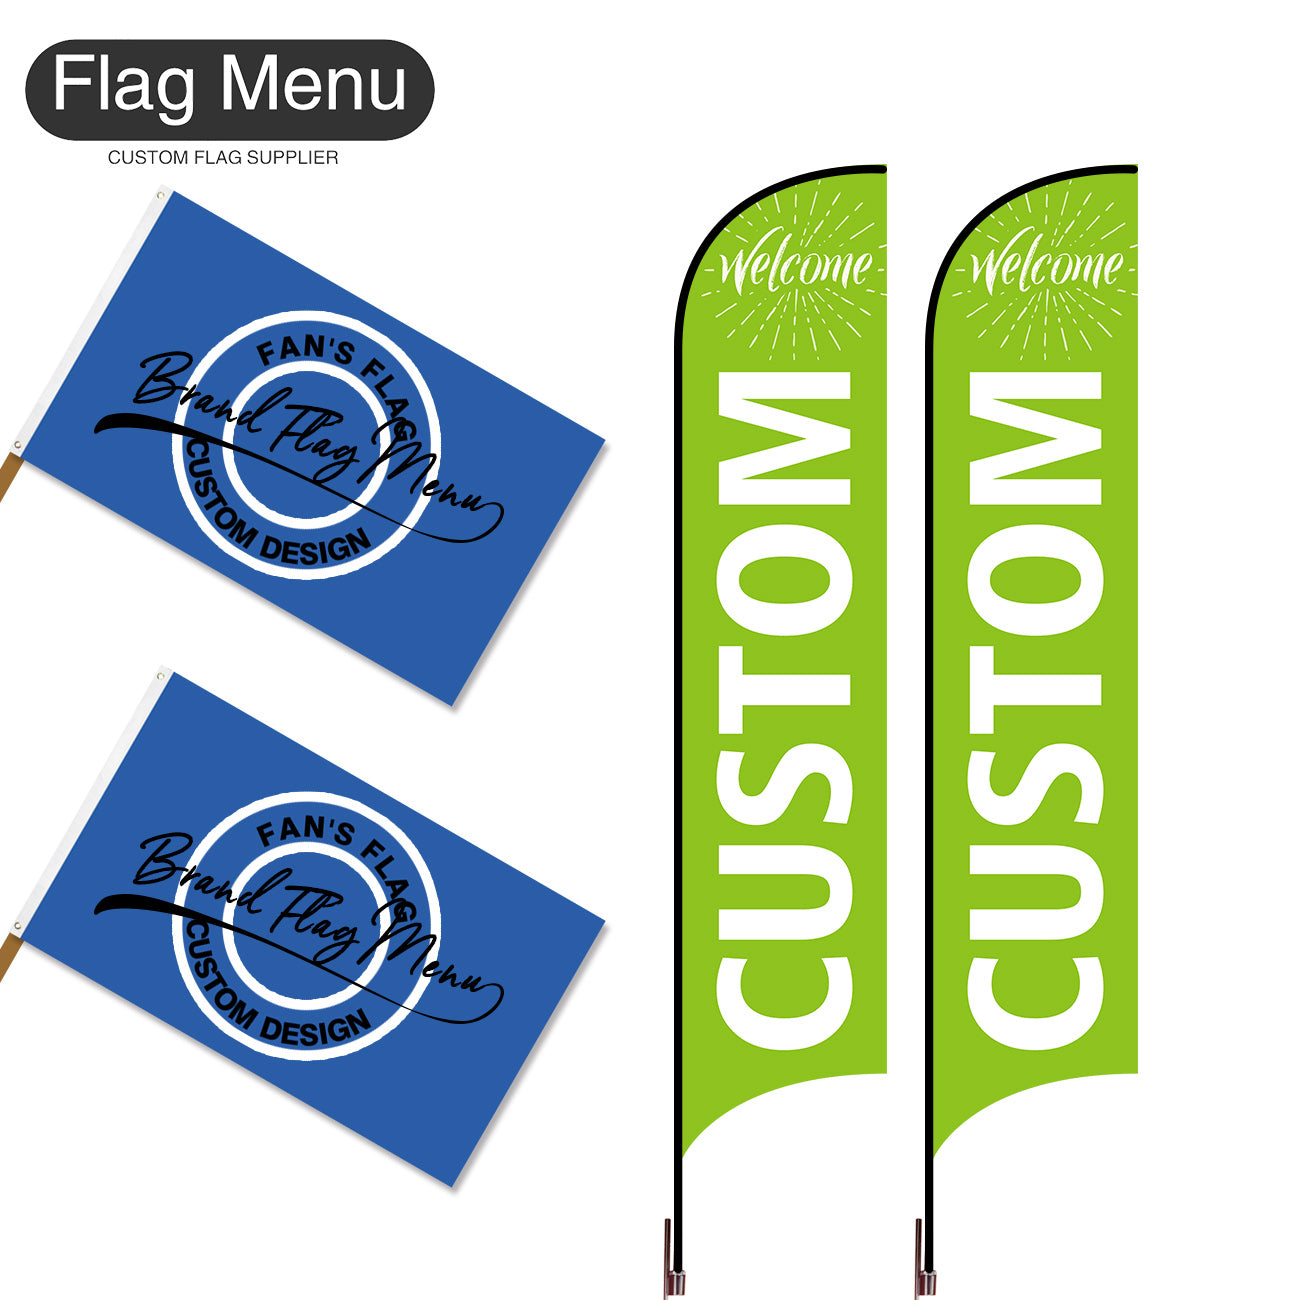 Outdoor Advertising Set - C-Green B-S - Feather Flag -Double Sided & 3'x5' Regular Flag -Single Sided-Cross & Water Bag-Flag Menu